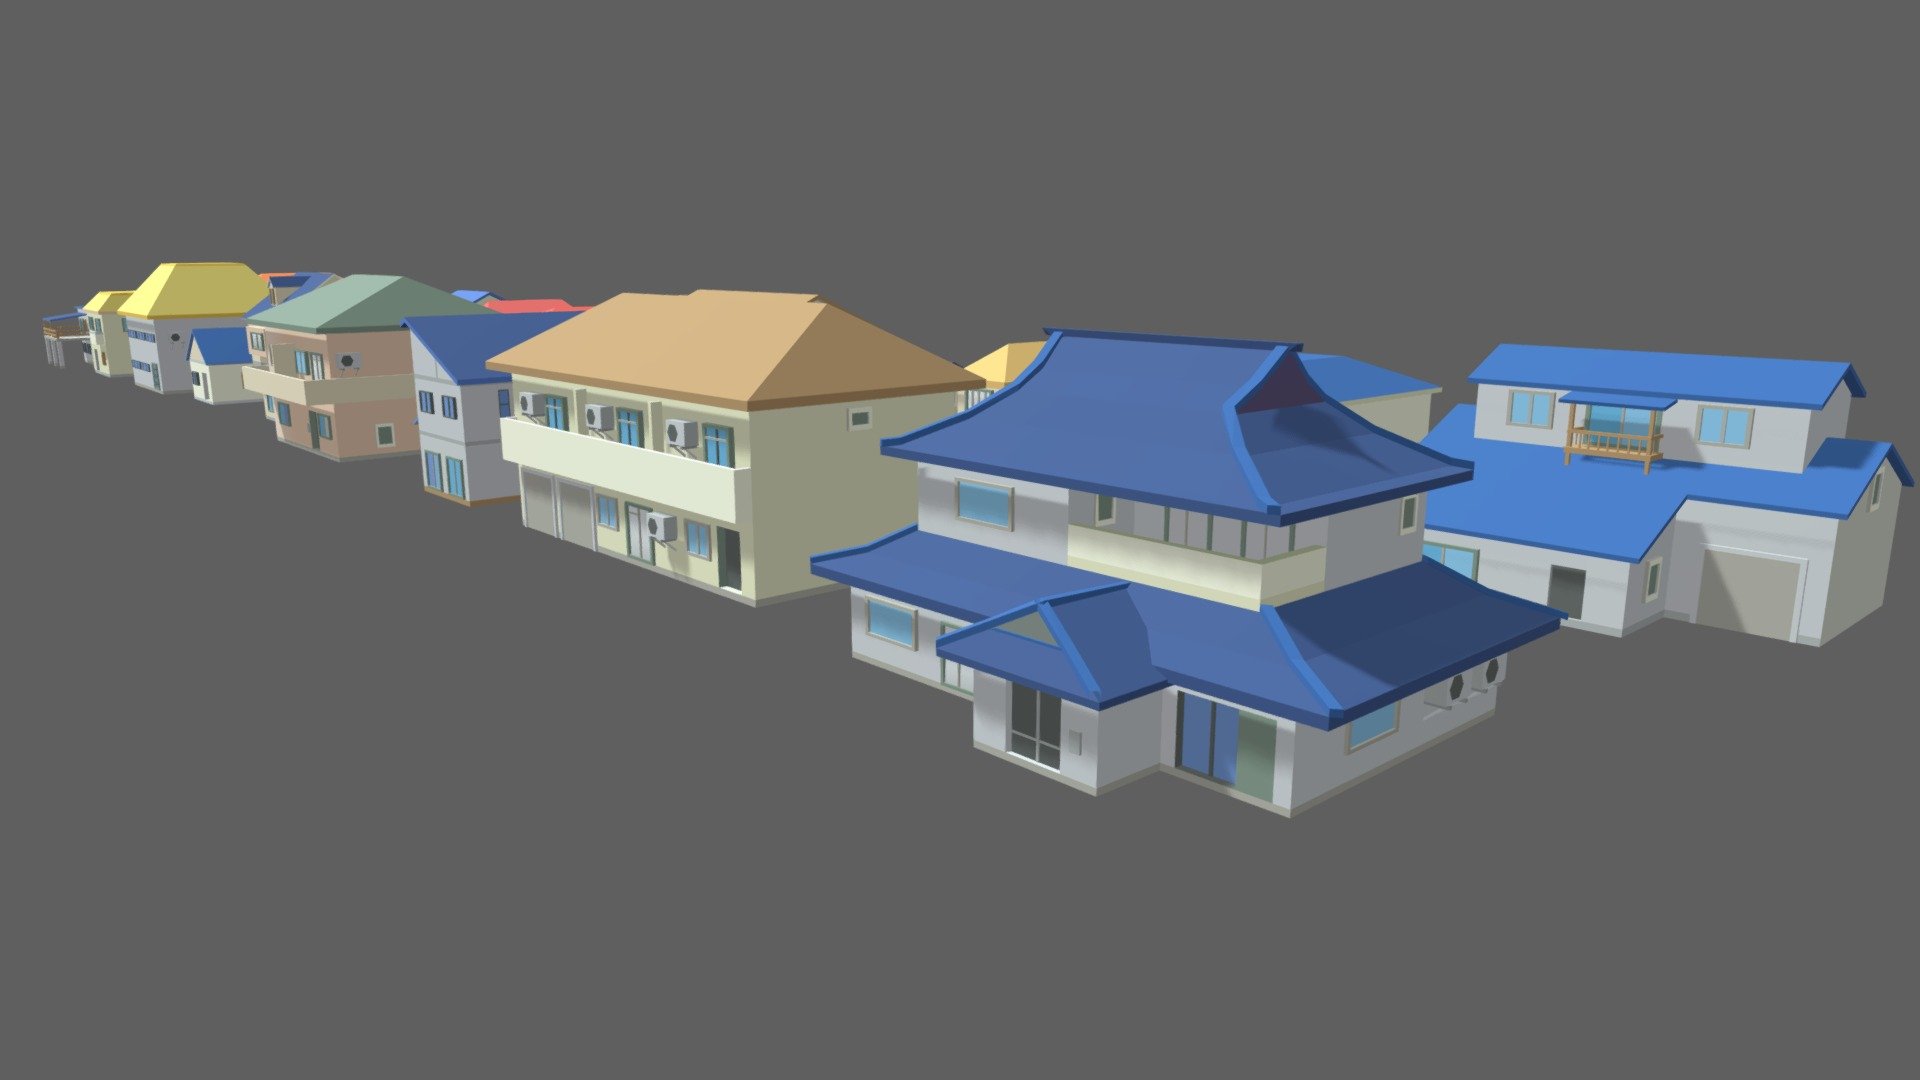 20 low poly Japanese house in Anime style
Ideal for outdoor decor and close-ups (Animation) 
Or for mobile game decor

Technical detail:
* Format: FBX 7.4 binaire
* Number materials: 1
* Number textures: 1
* Number meshs: 20
* Number skeletons: 0
* Texture size: (284x284) - Pack Anime House Low-Poly - 3D model by JABAMI Production (@JabamiProduction) 3d model